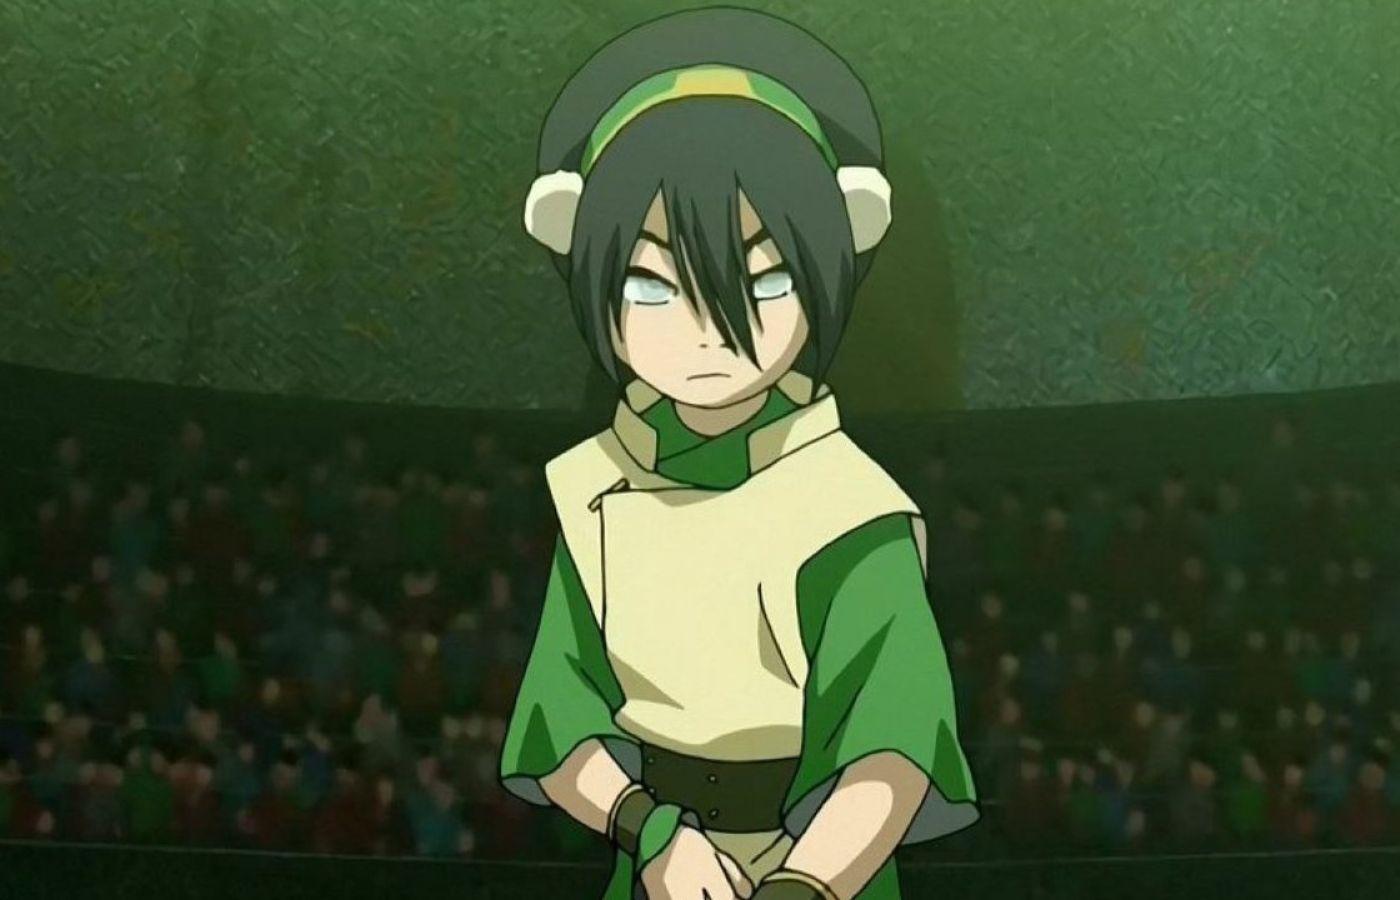 Toph in the 2005 version of Avatar: The Last Airbender